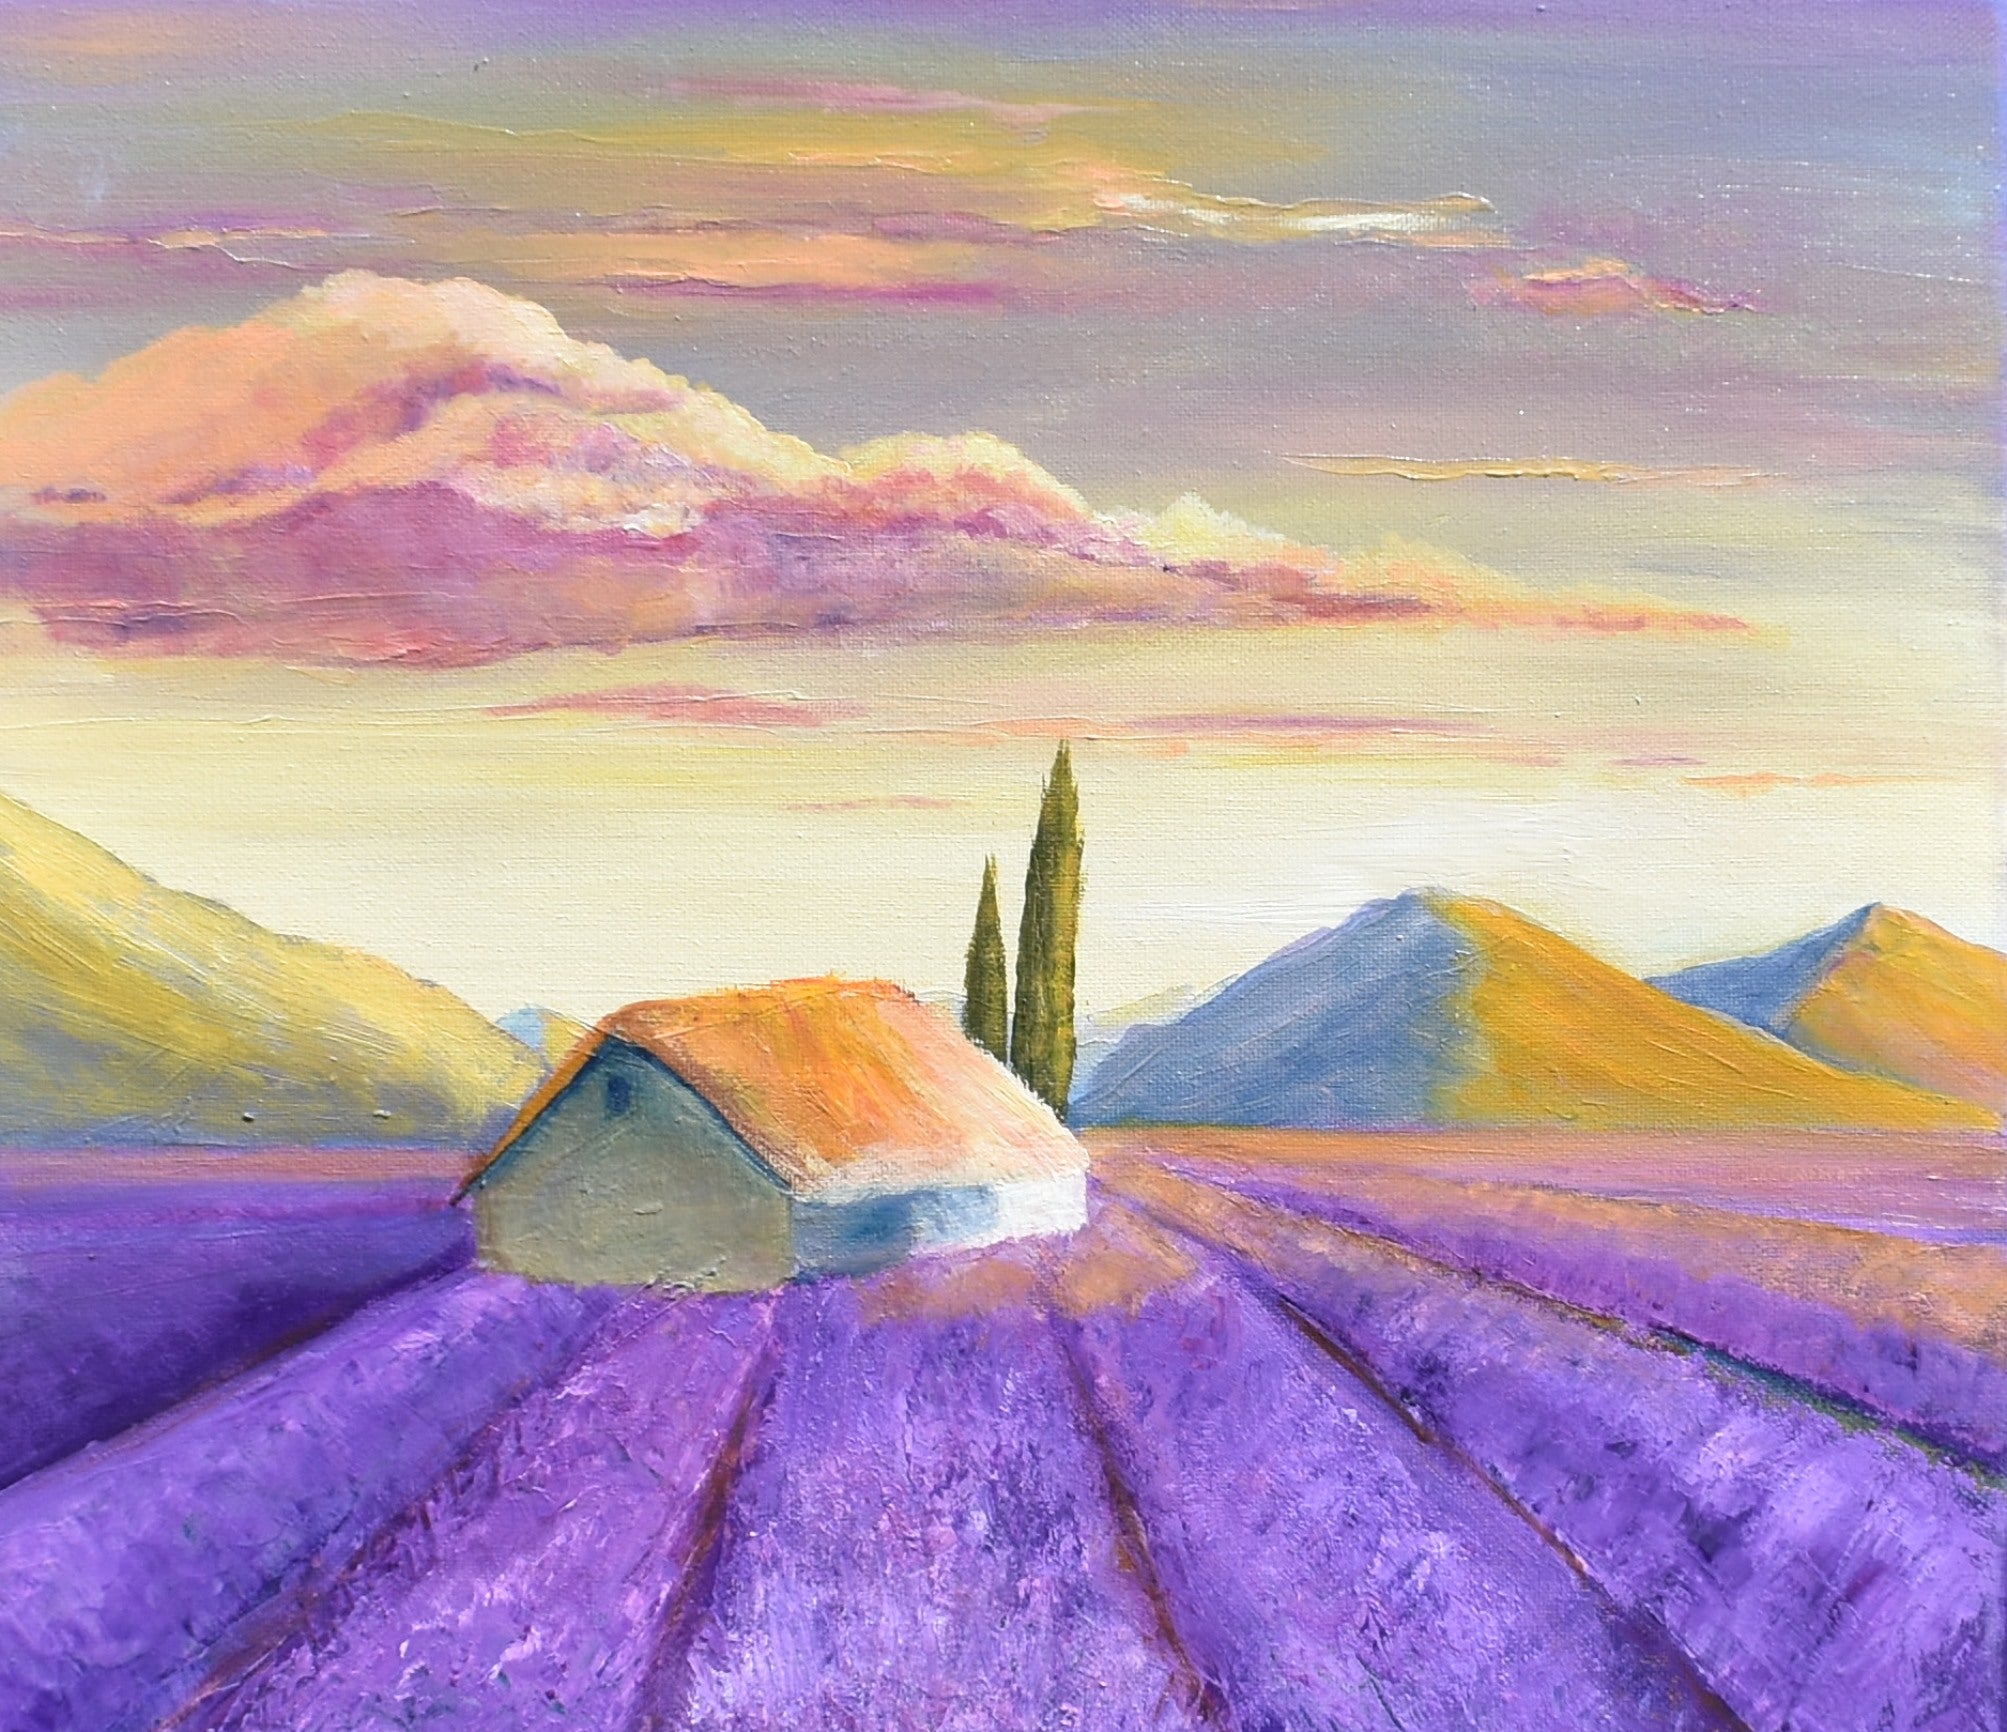 Provence (SOLD)